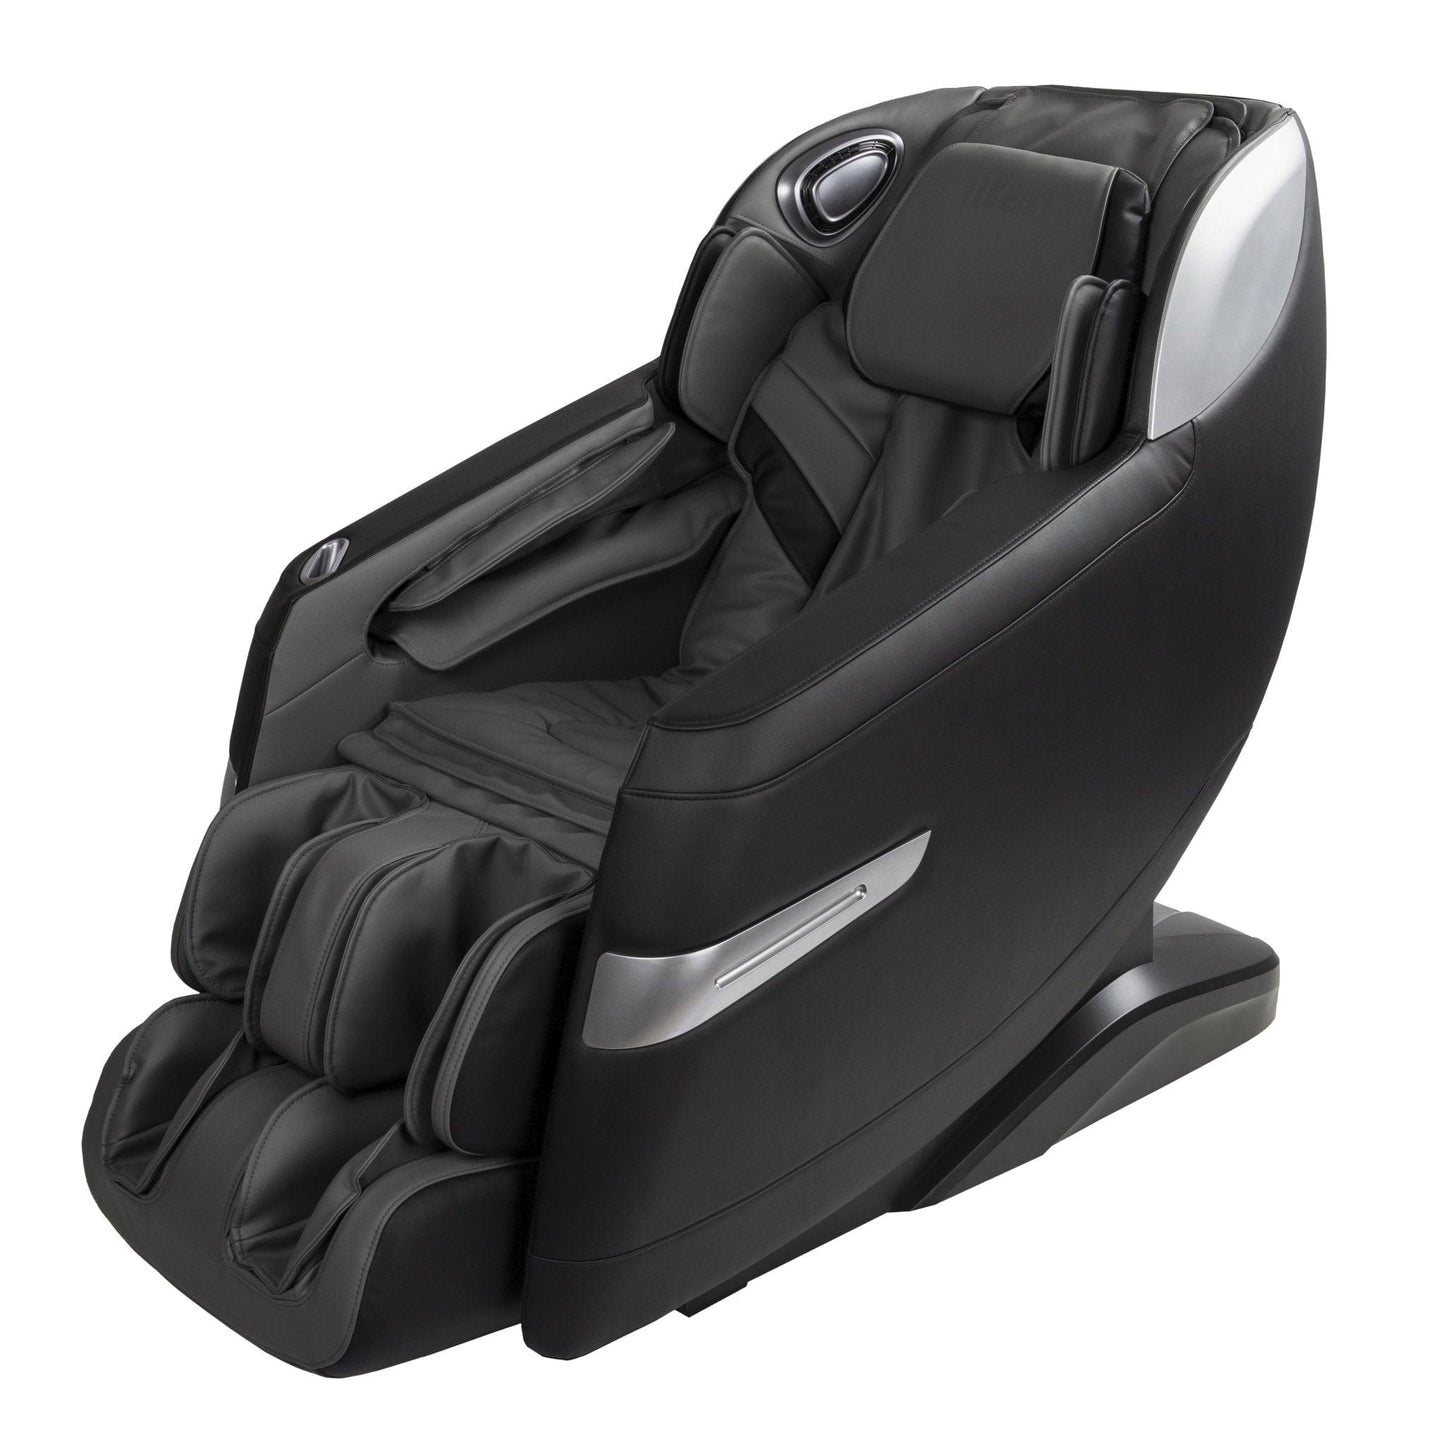 Titan 3D Quantum Black / Curbside Delivery - Free / 1 Year(Parts/Labor) 2&3Year(Parts Only) - Free titan-chair